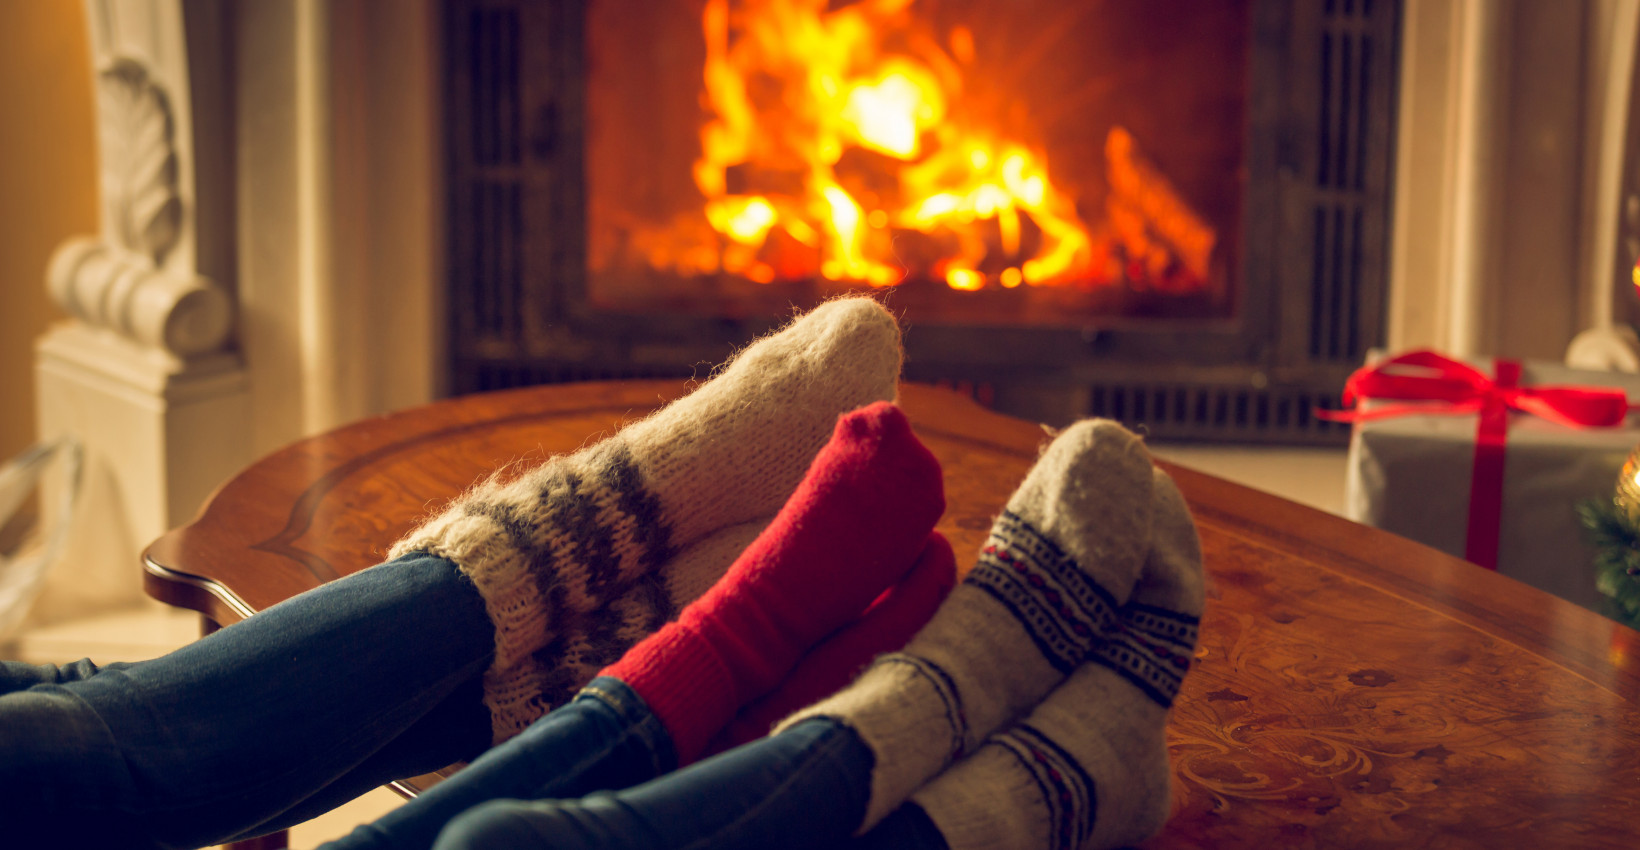 A couple wearing Christmas-colored socks resting their feet by the fireplace